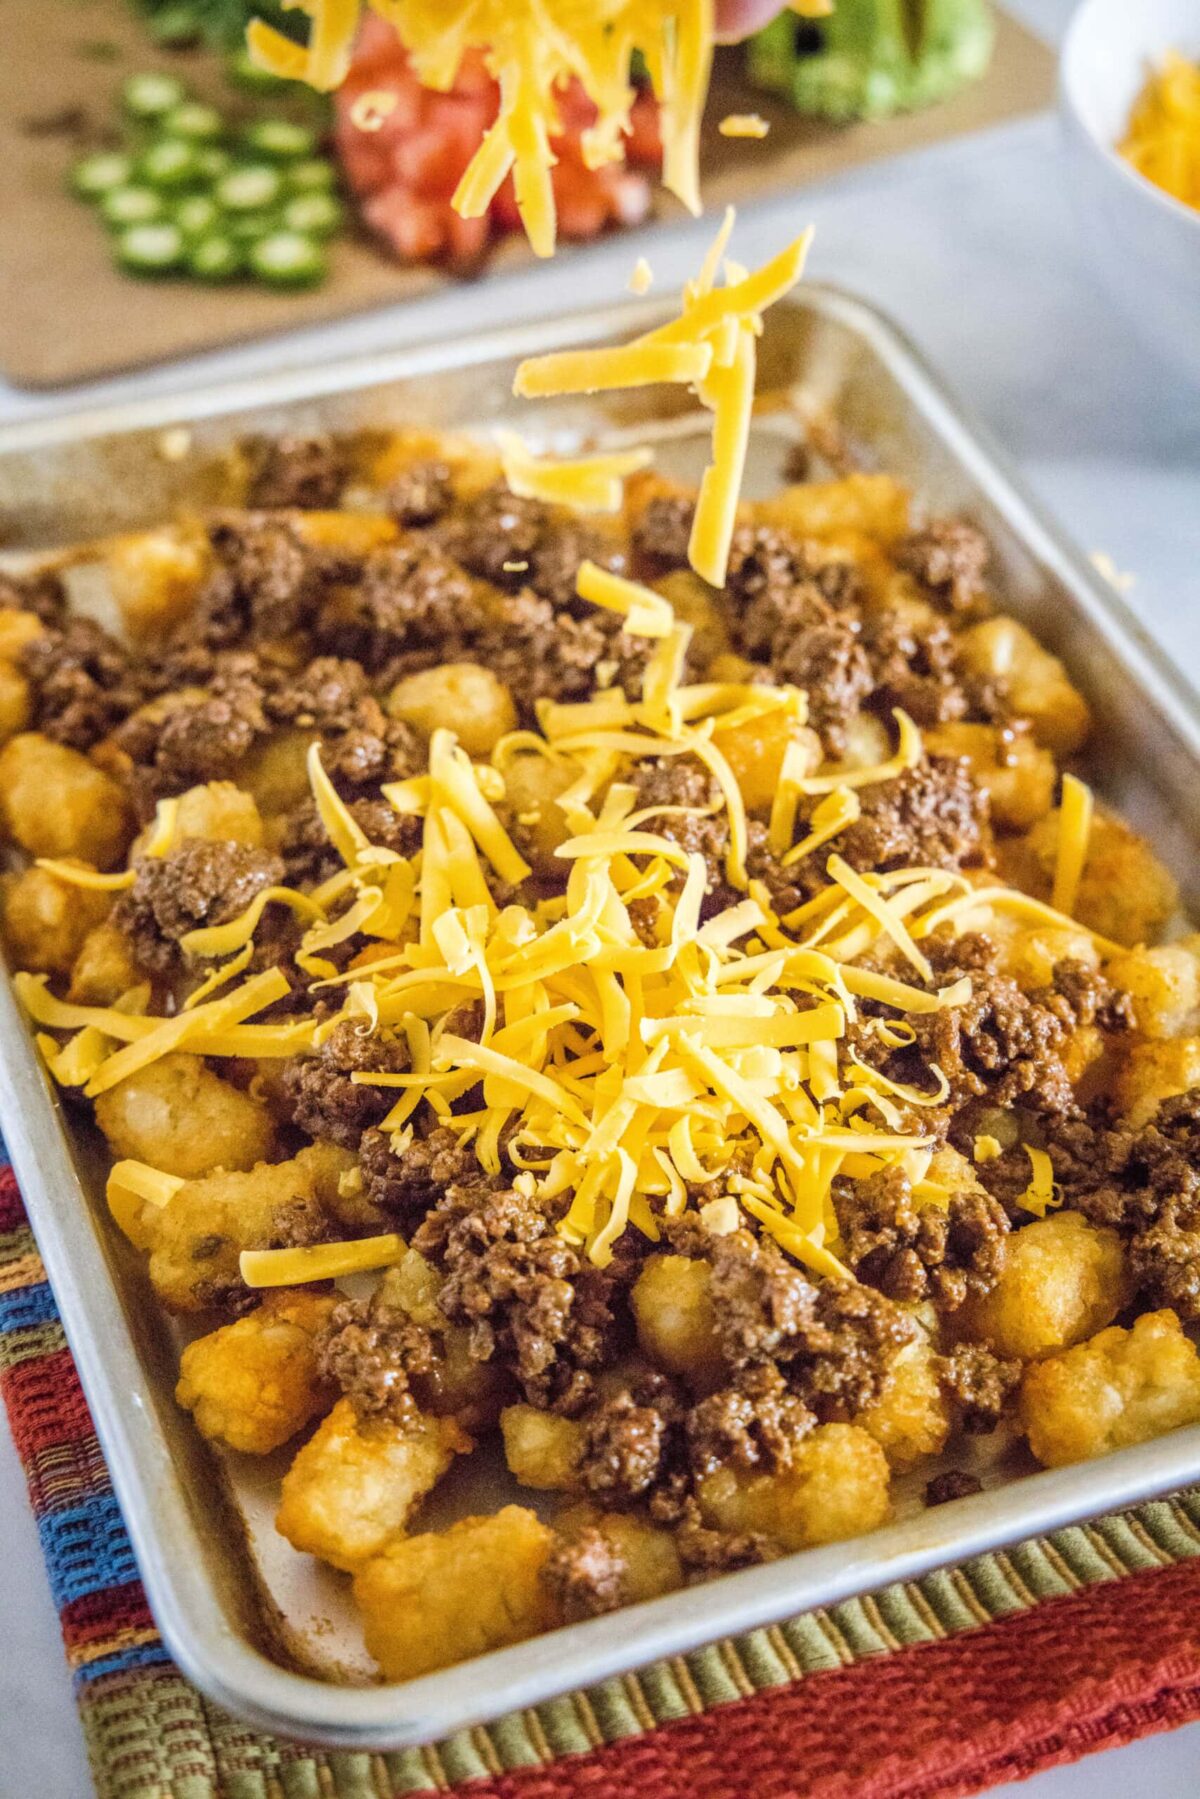 Shredded cheese being dropped onto a baking sheet with tater tots and ground beef